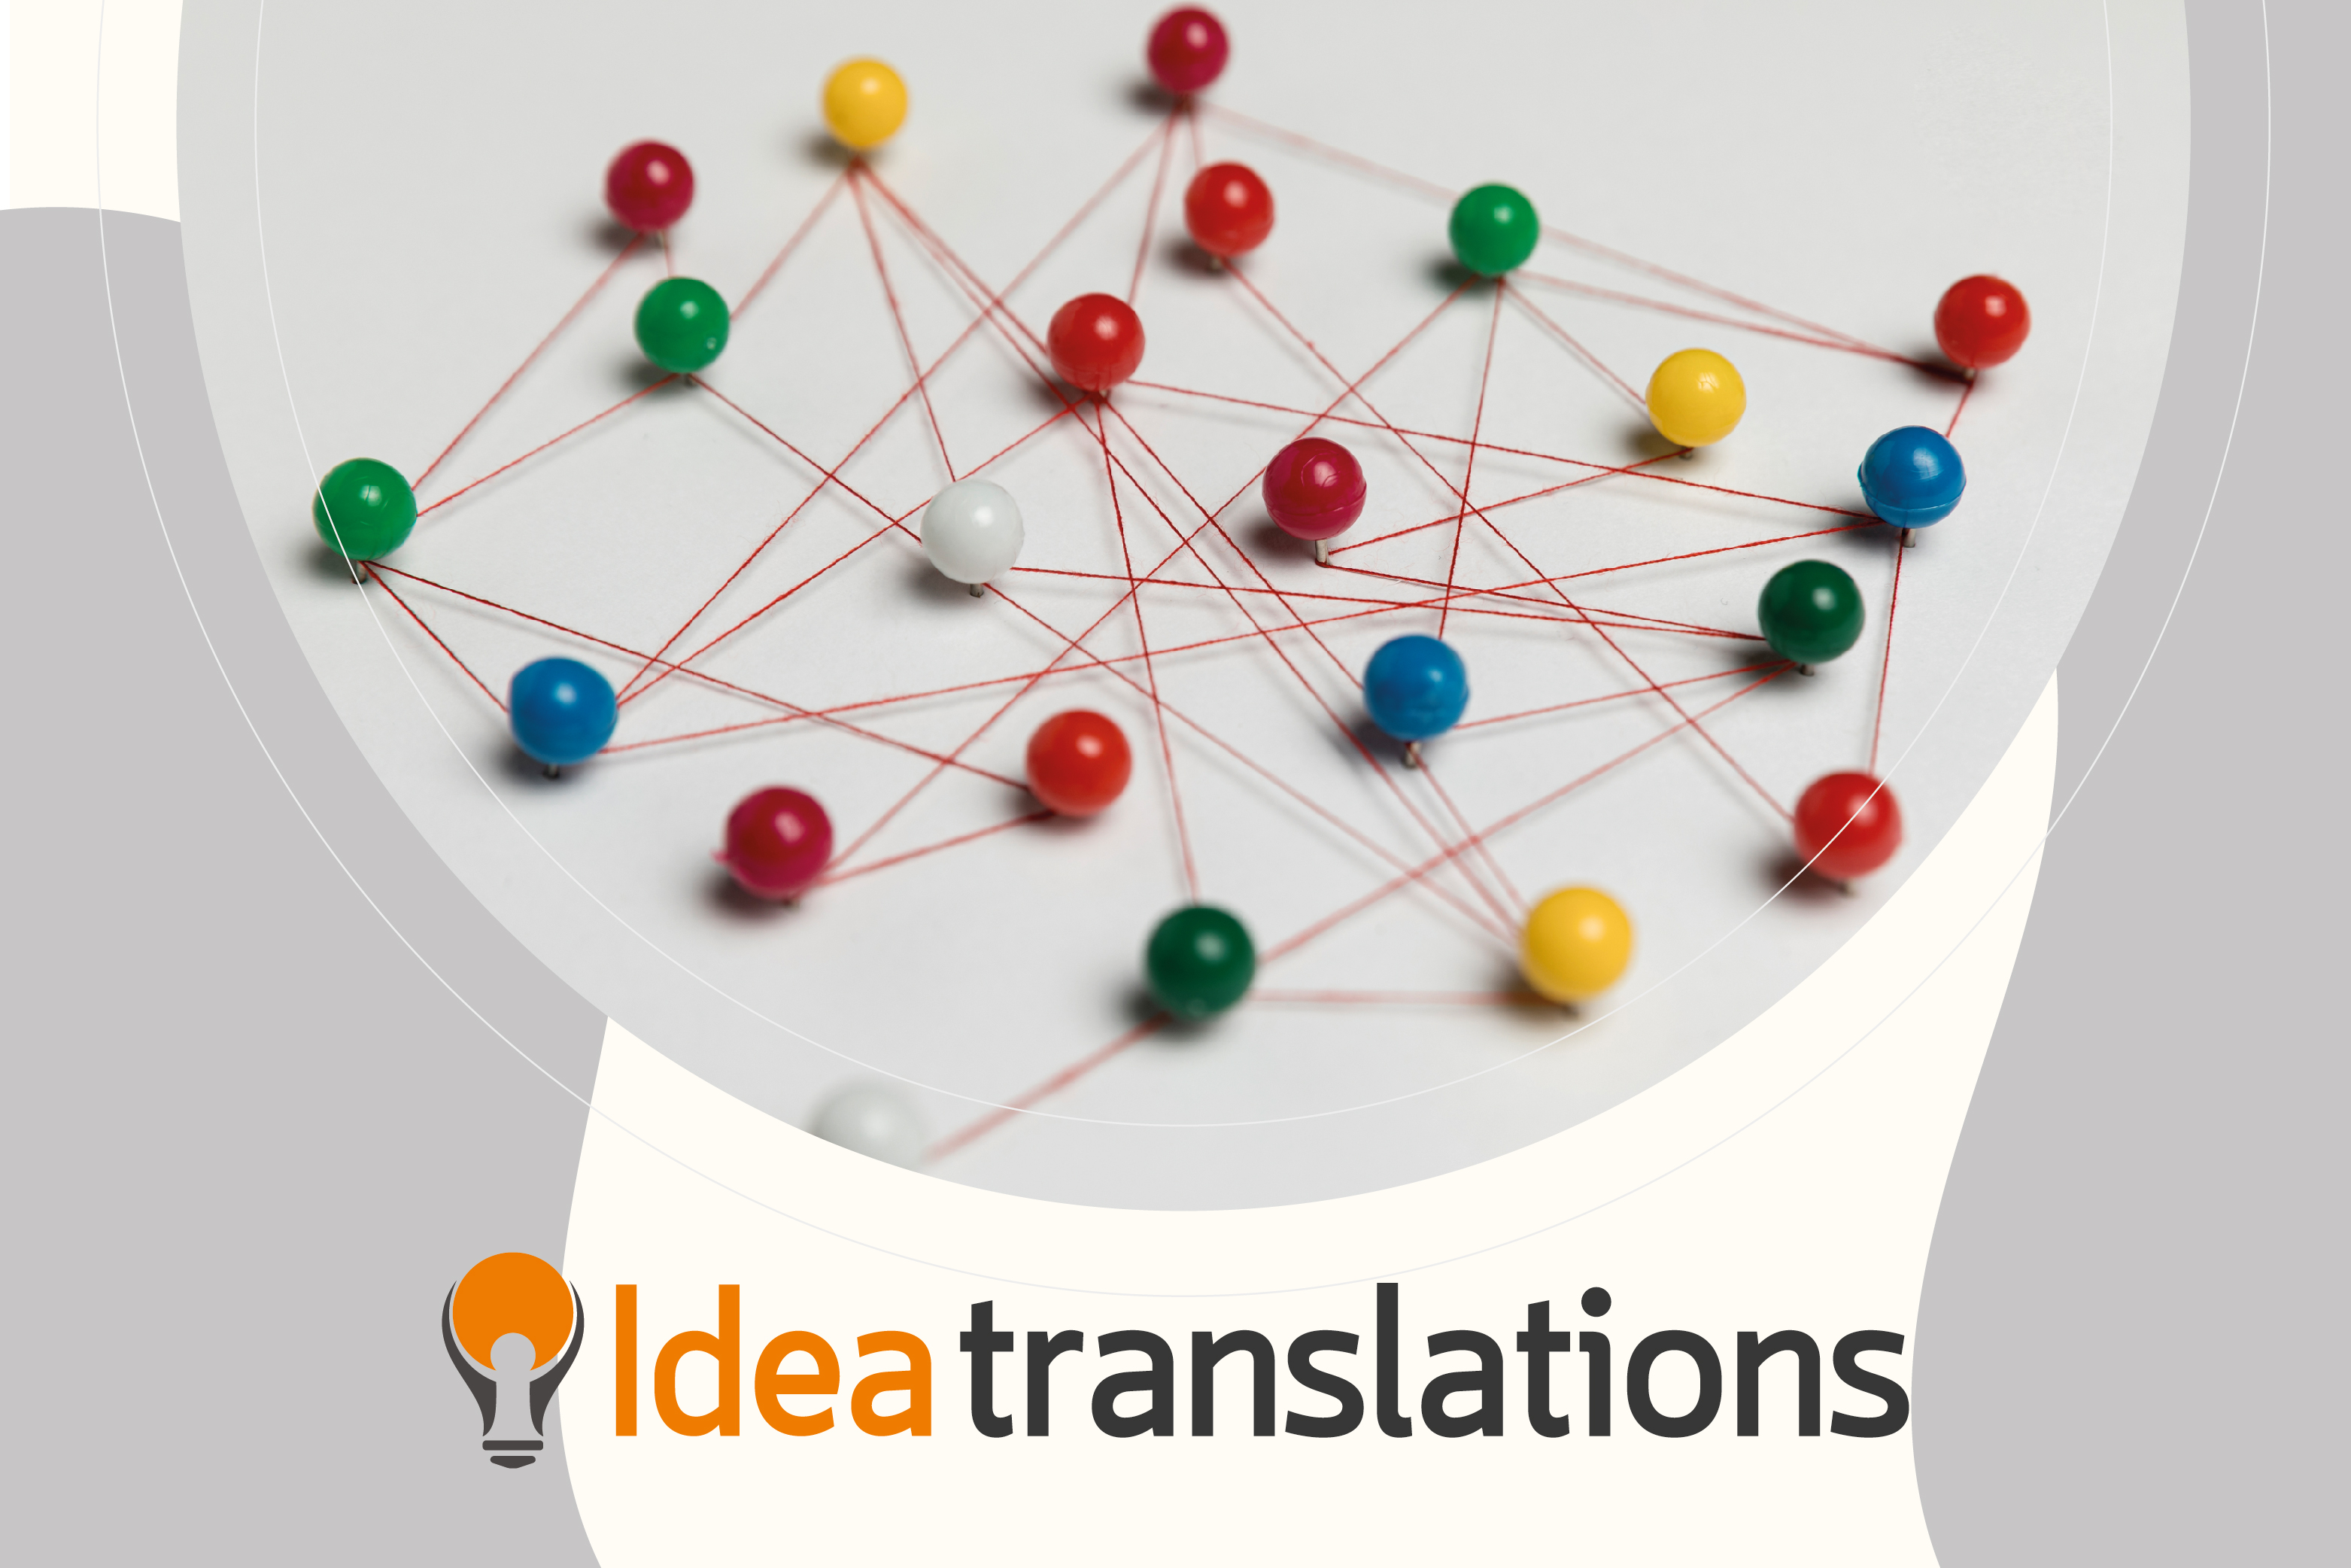 Conquering New Markets: Why Translation is Key